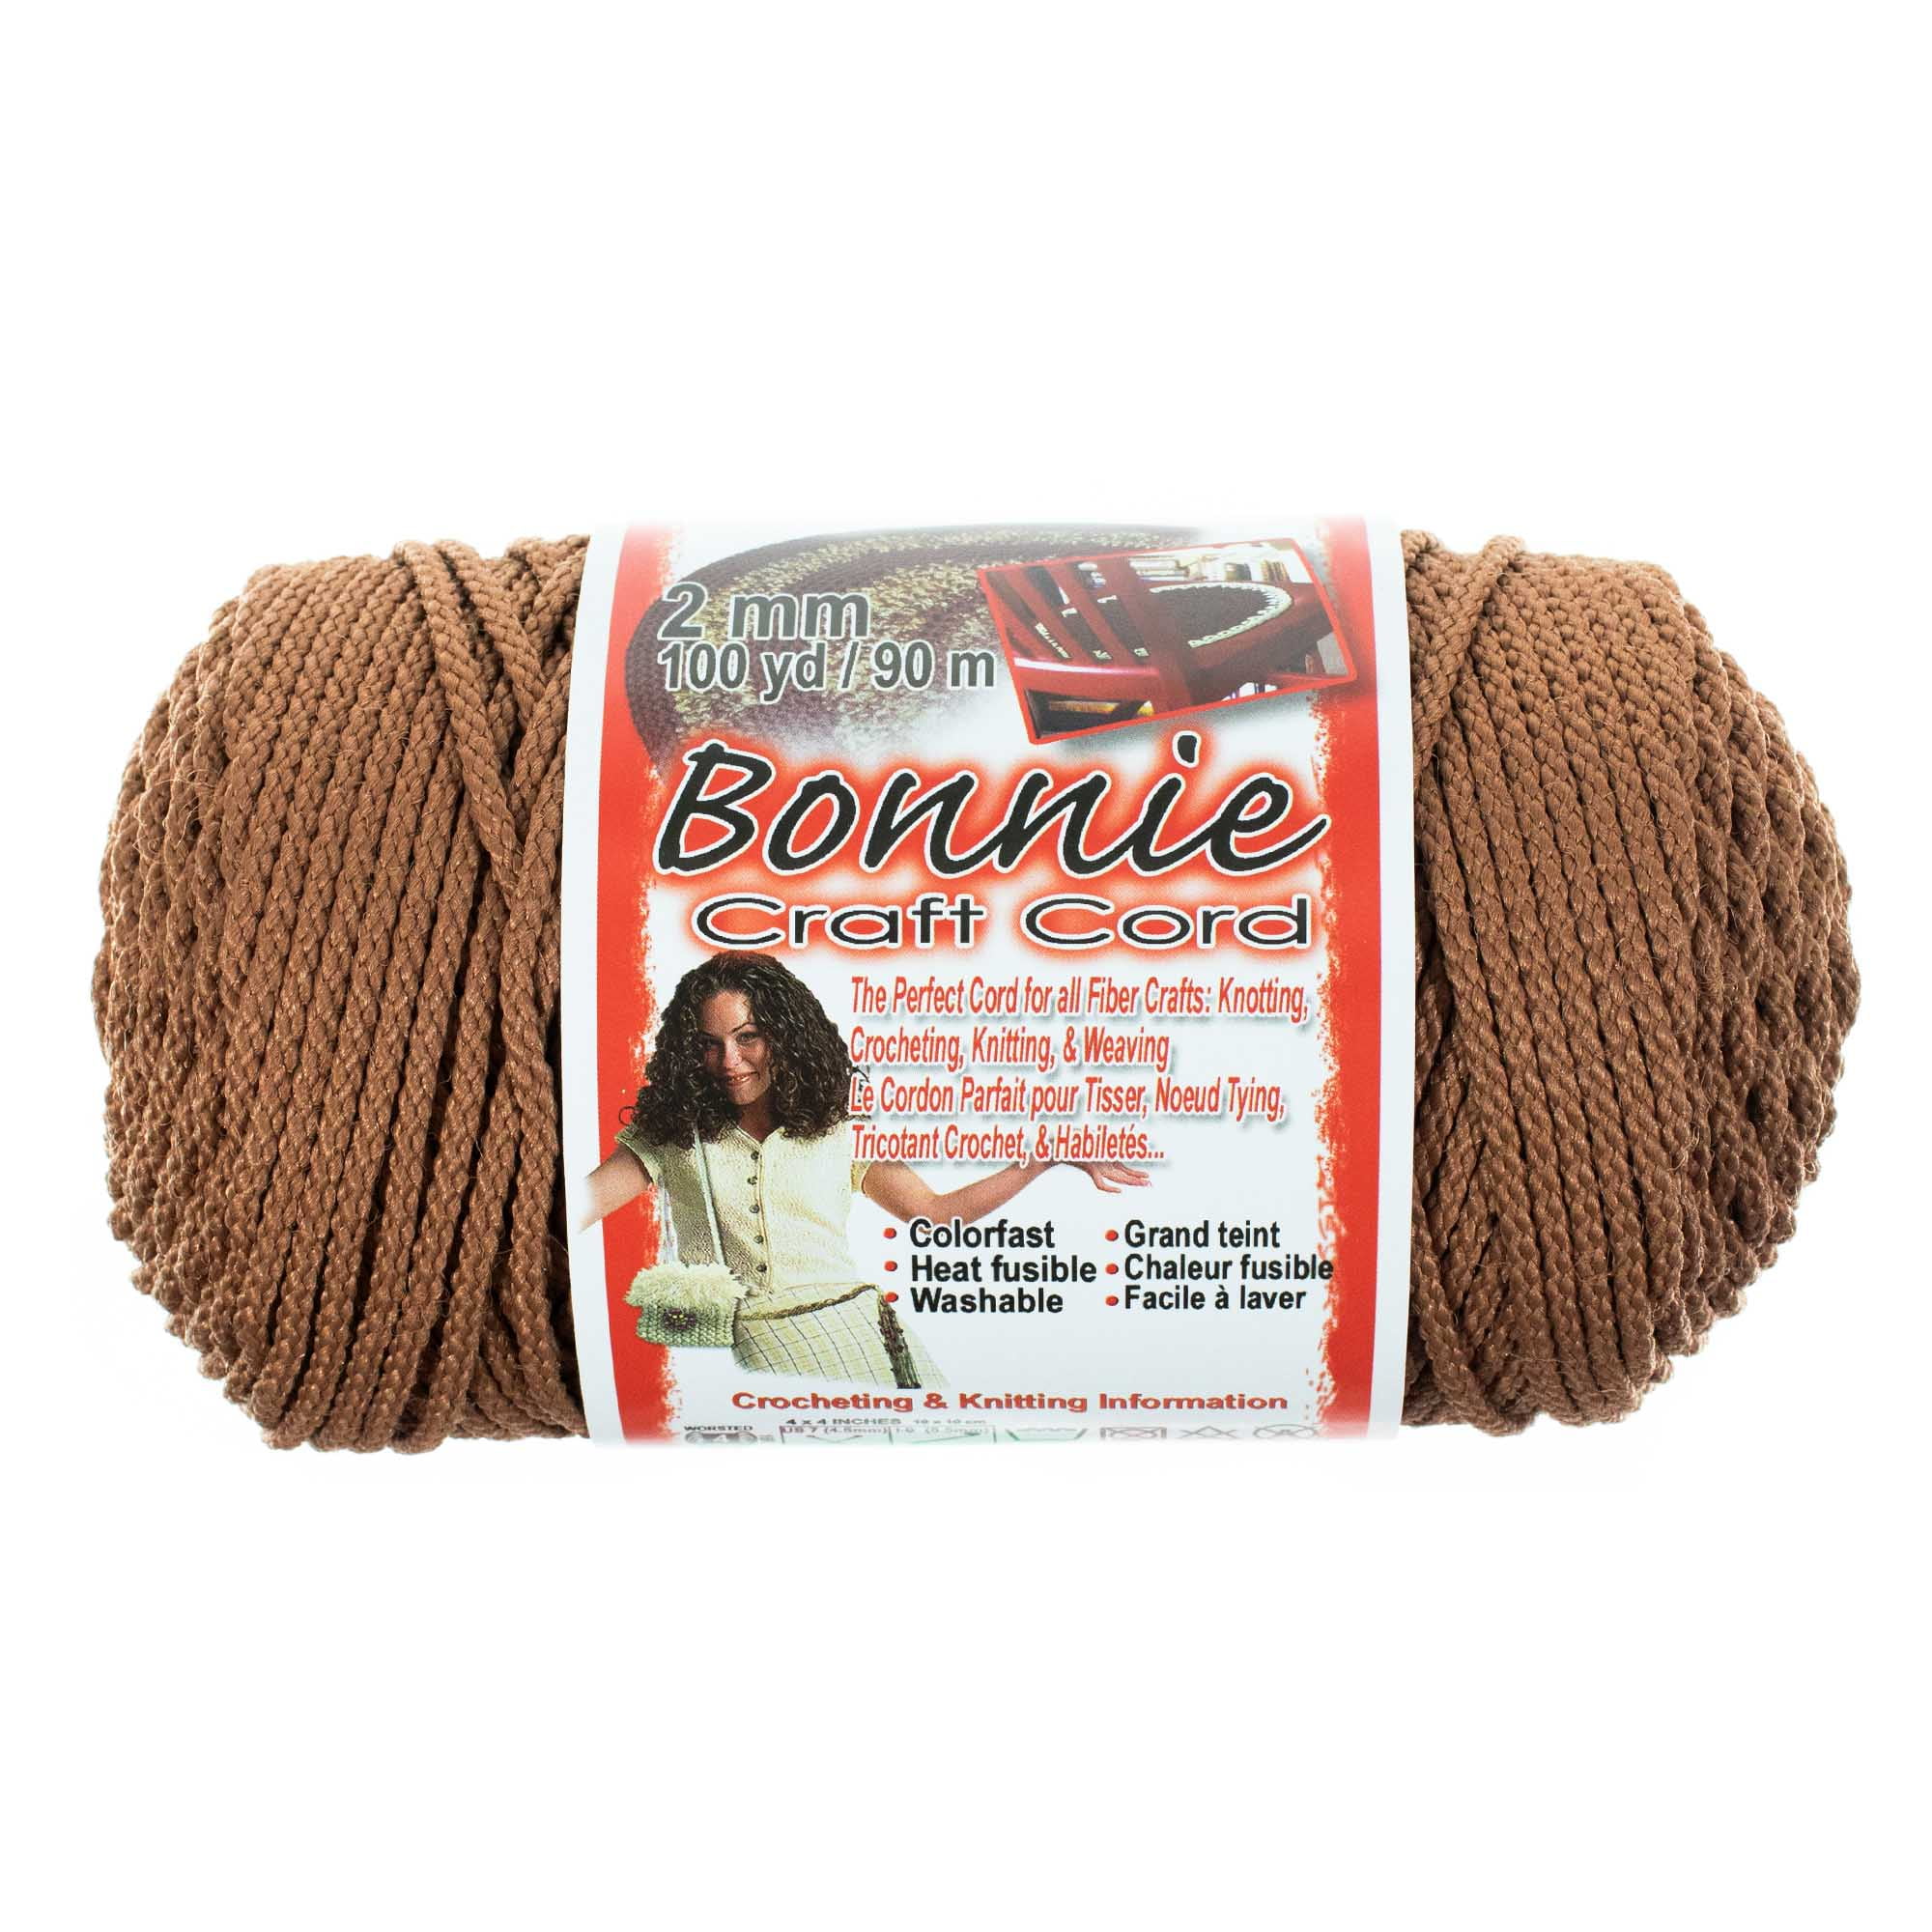 2mm Bonnie Crafting Cord - Great for Macrame, Knitting, and Weaving Crafts - 100 Yard Spools, Adult Unisex, Size: Single Pack, Brown